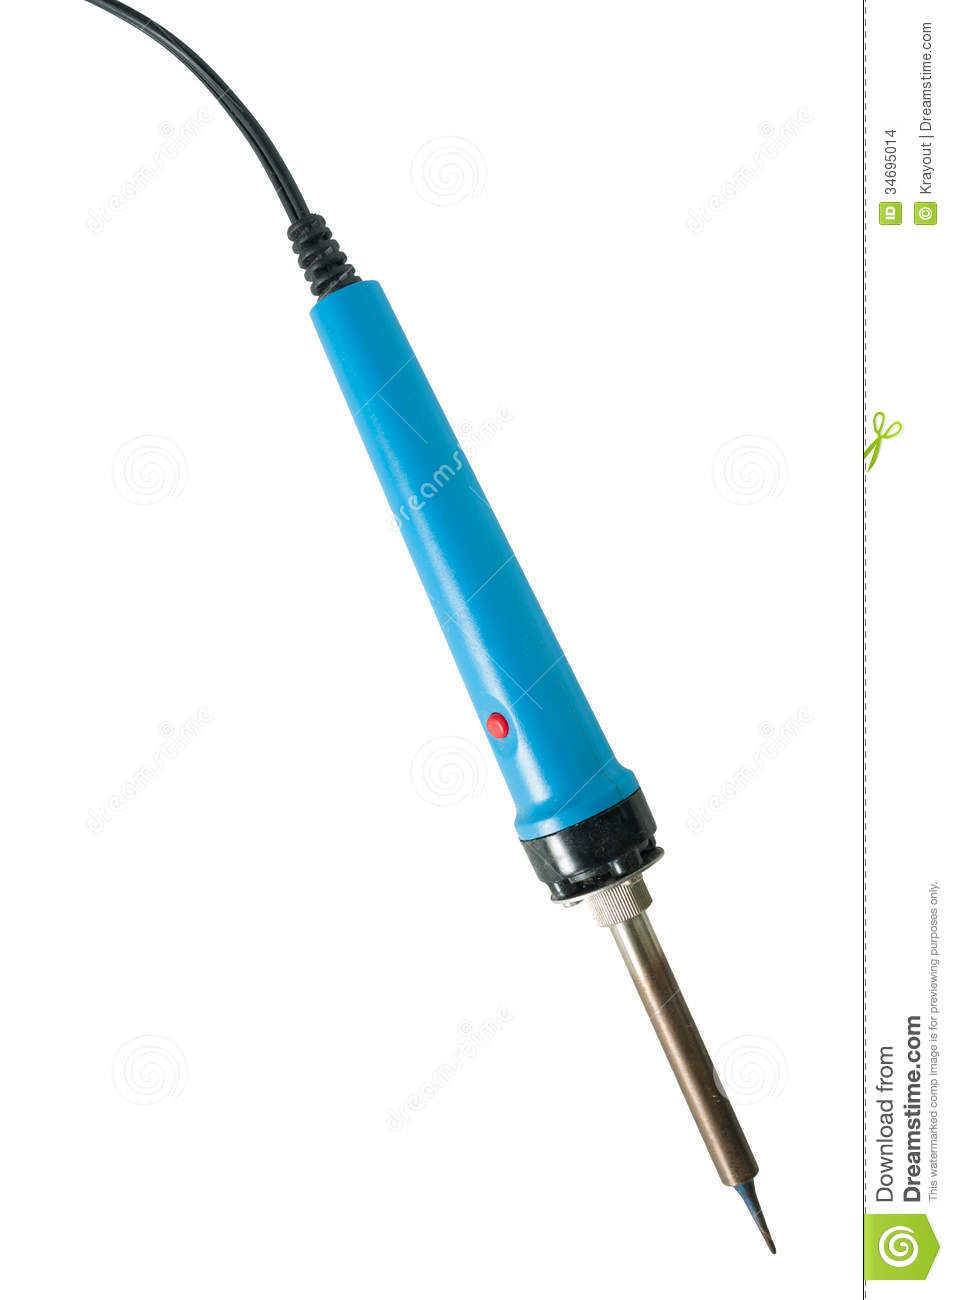 Soldering Iron Stock Images   Image  34695014